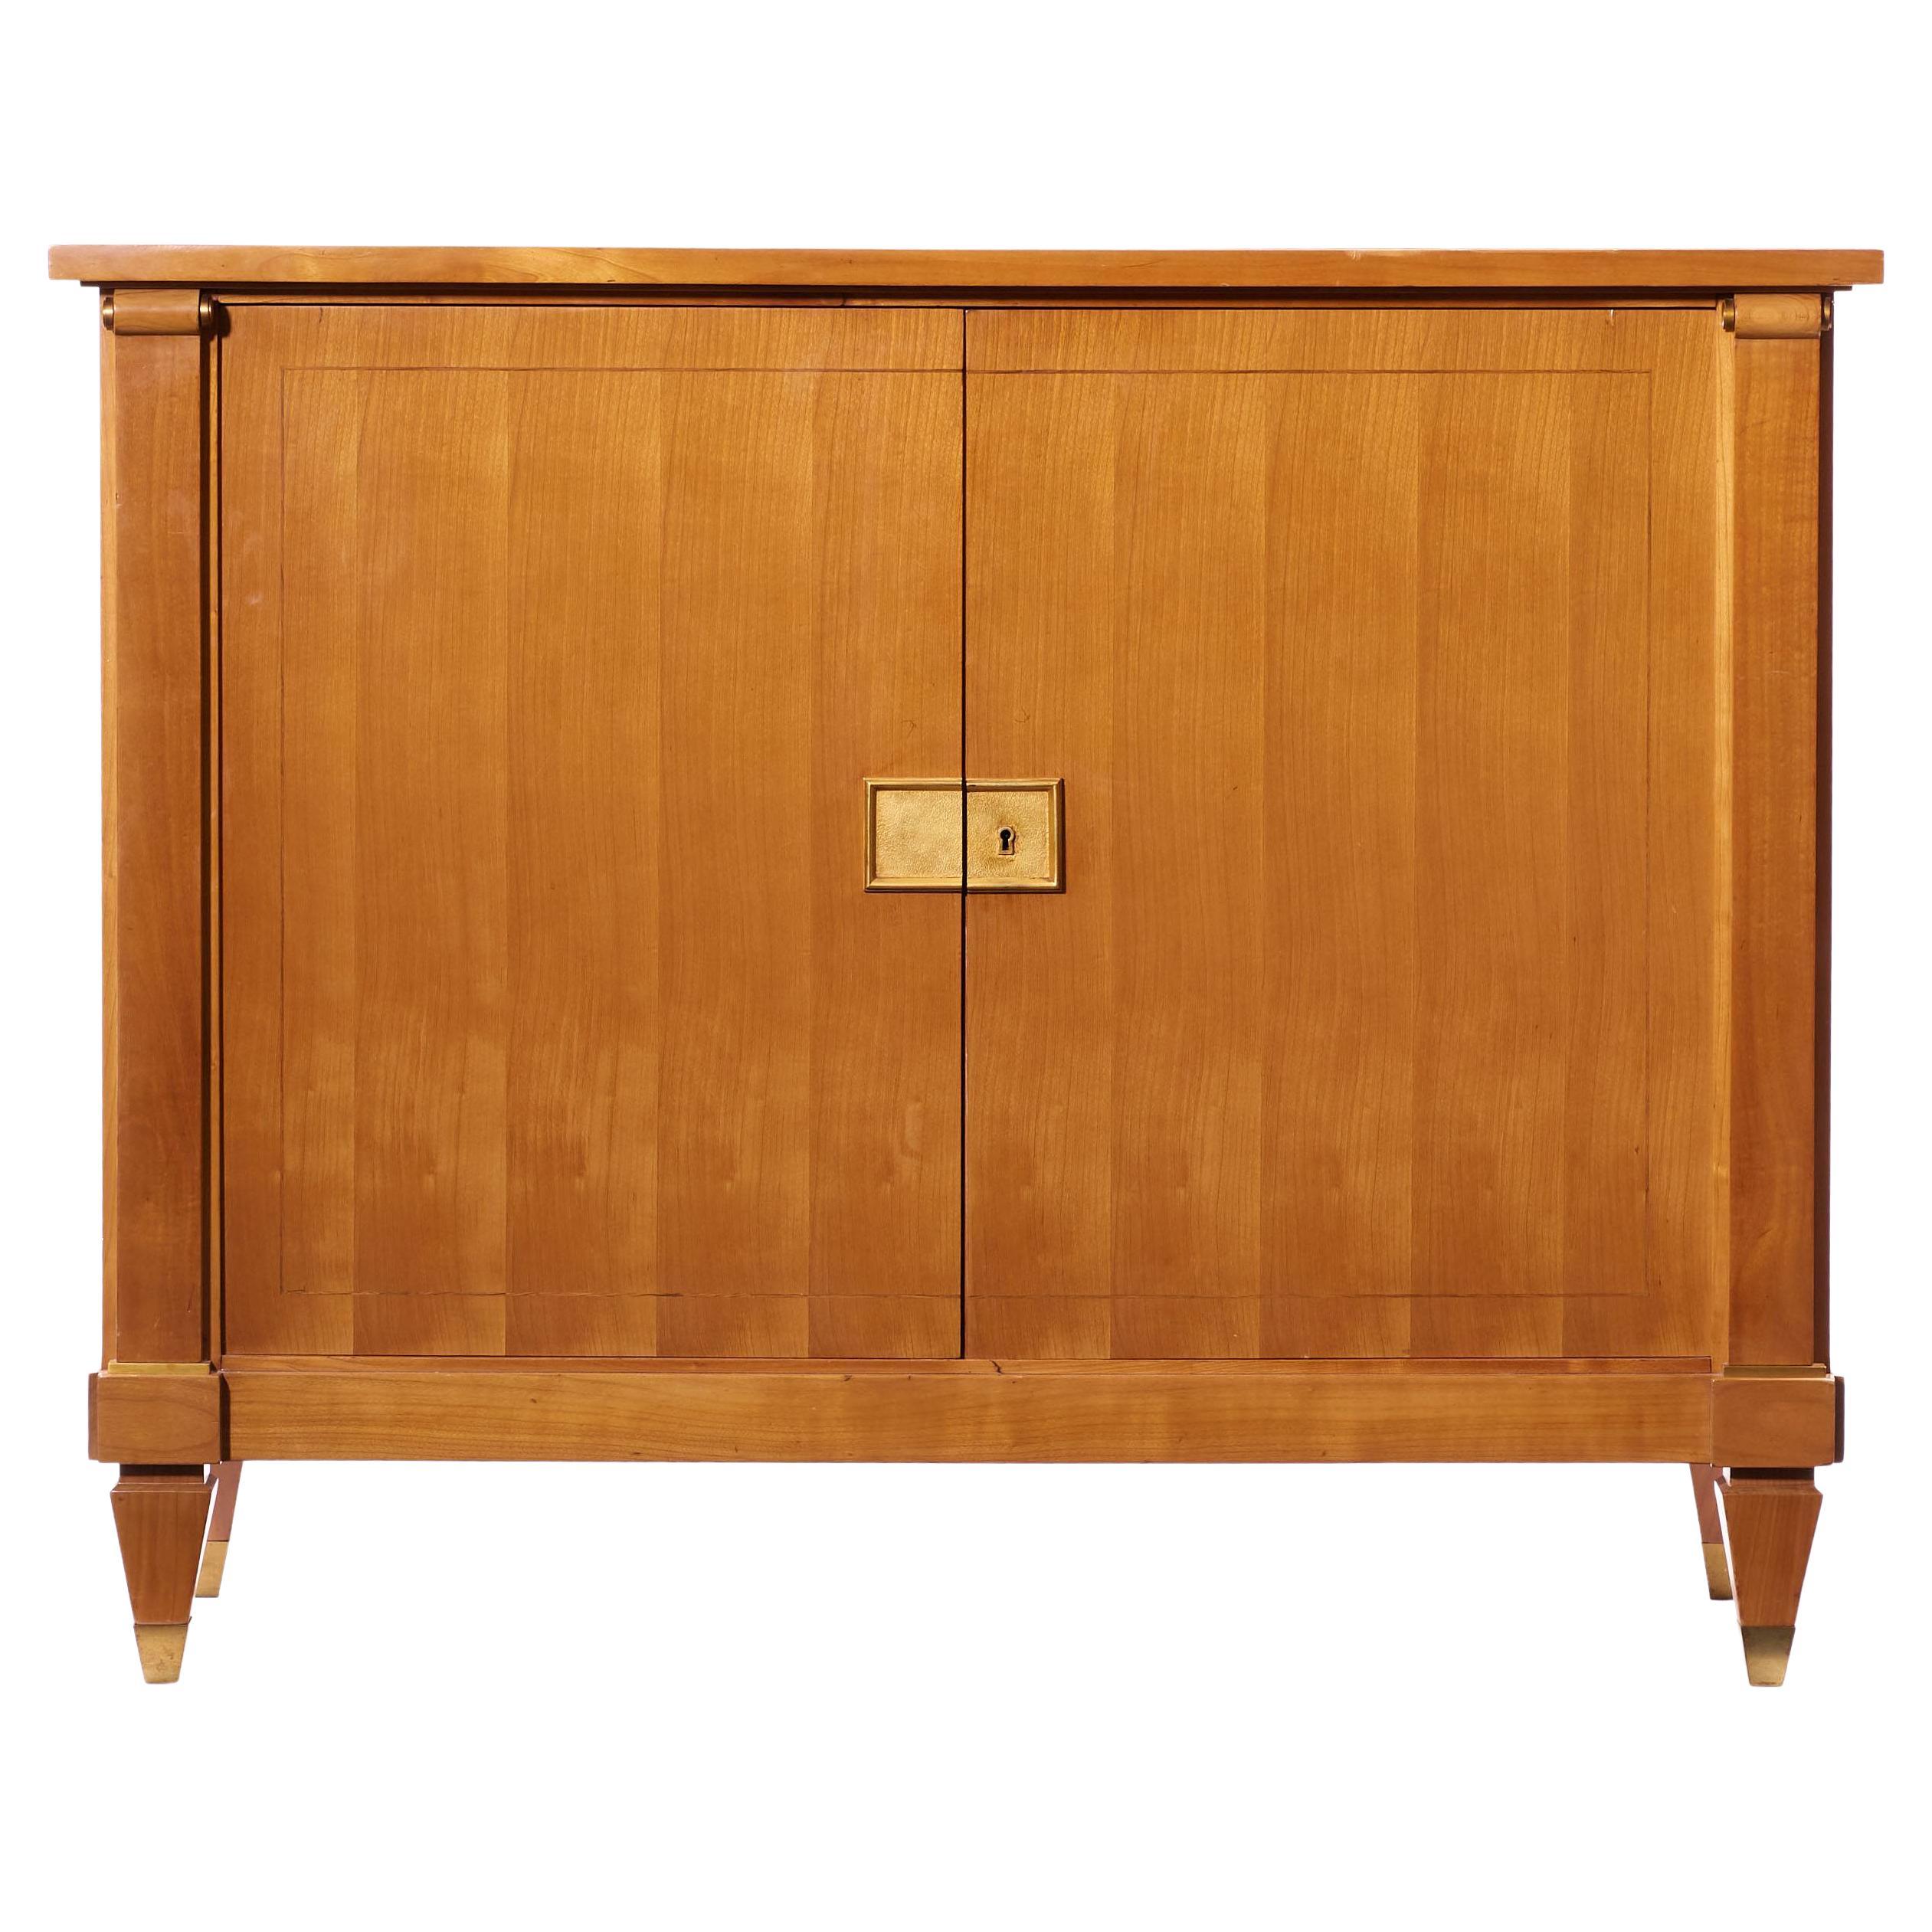 French Art Deco Sideboard / Buffet in Cherrywood by Maurice Rinck For Sale